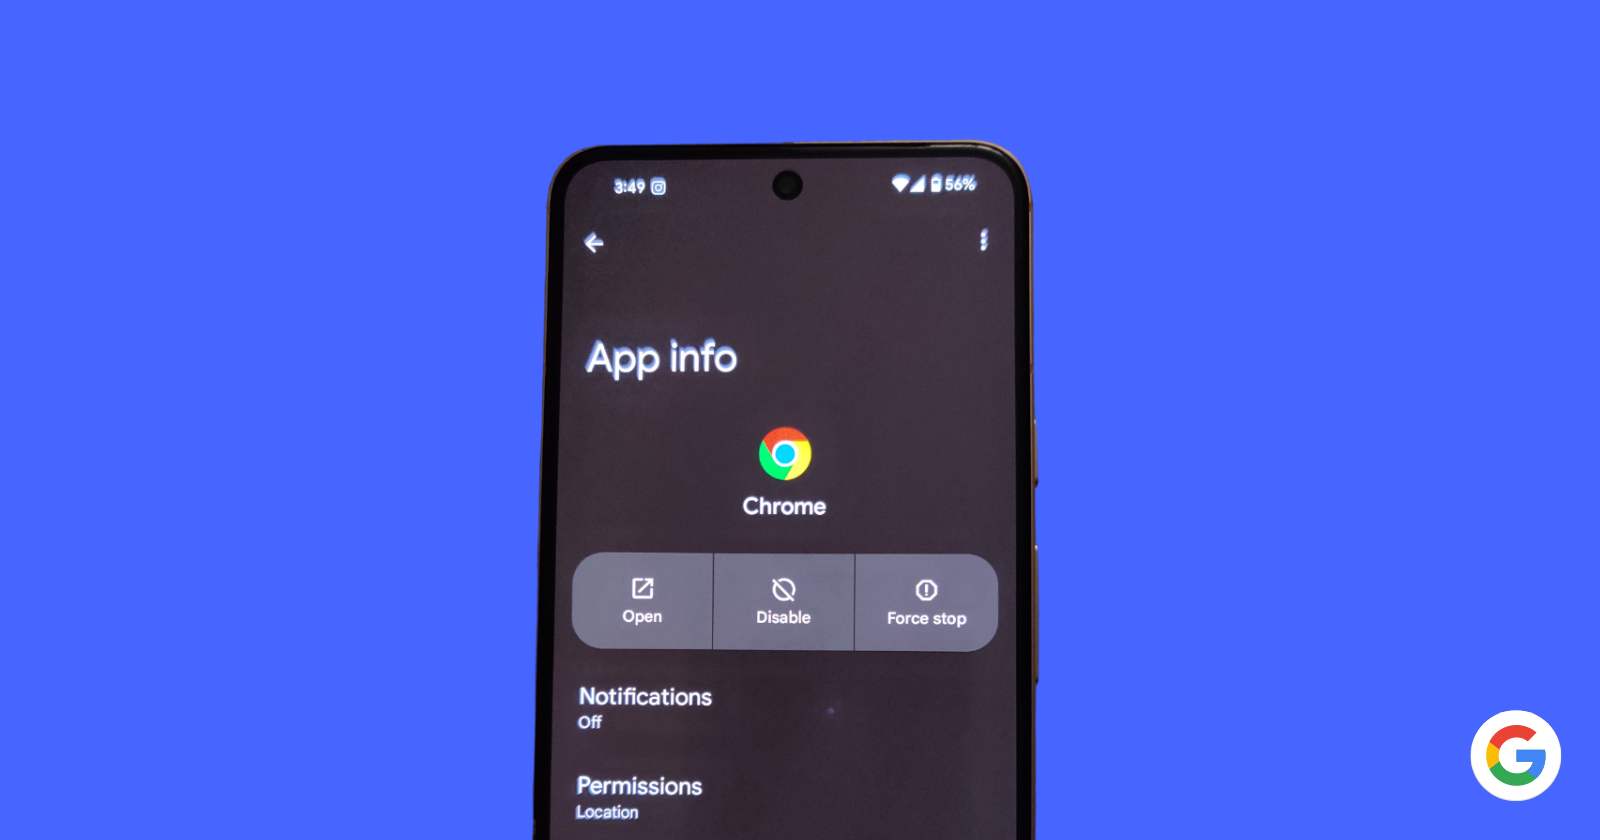 How to enable 'Get image descriptions' on Chrome on your Google Pixel phone